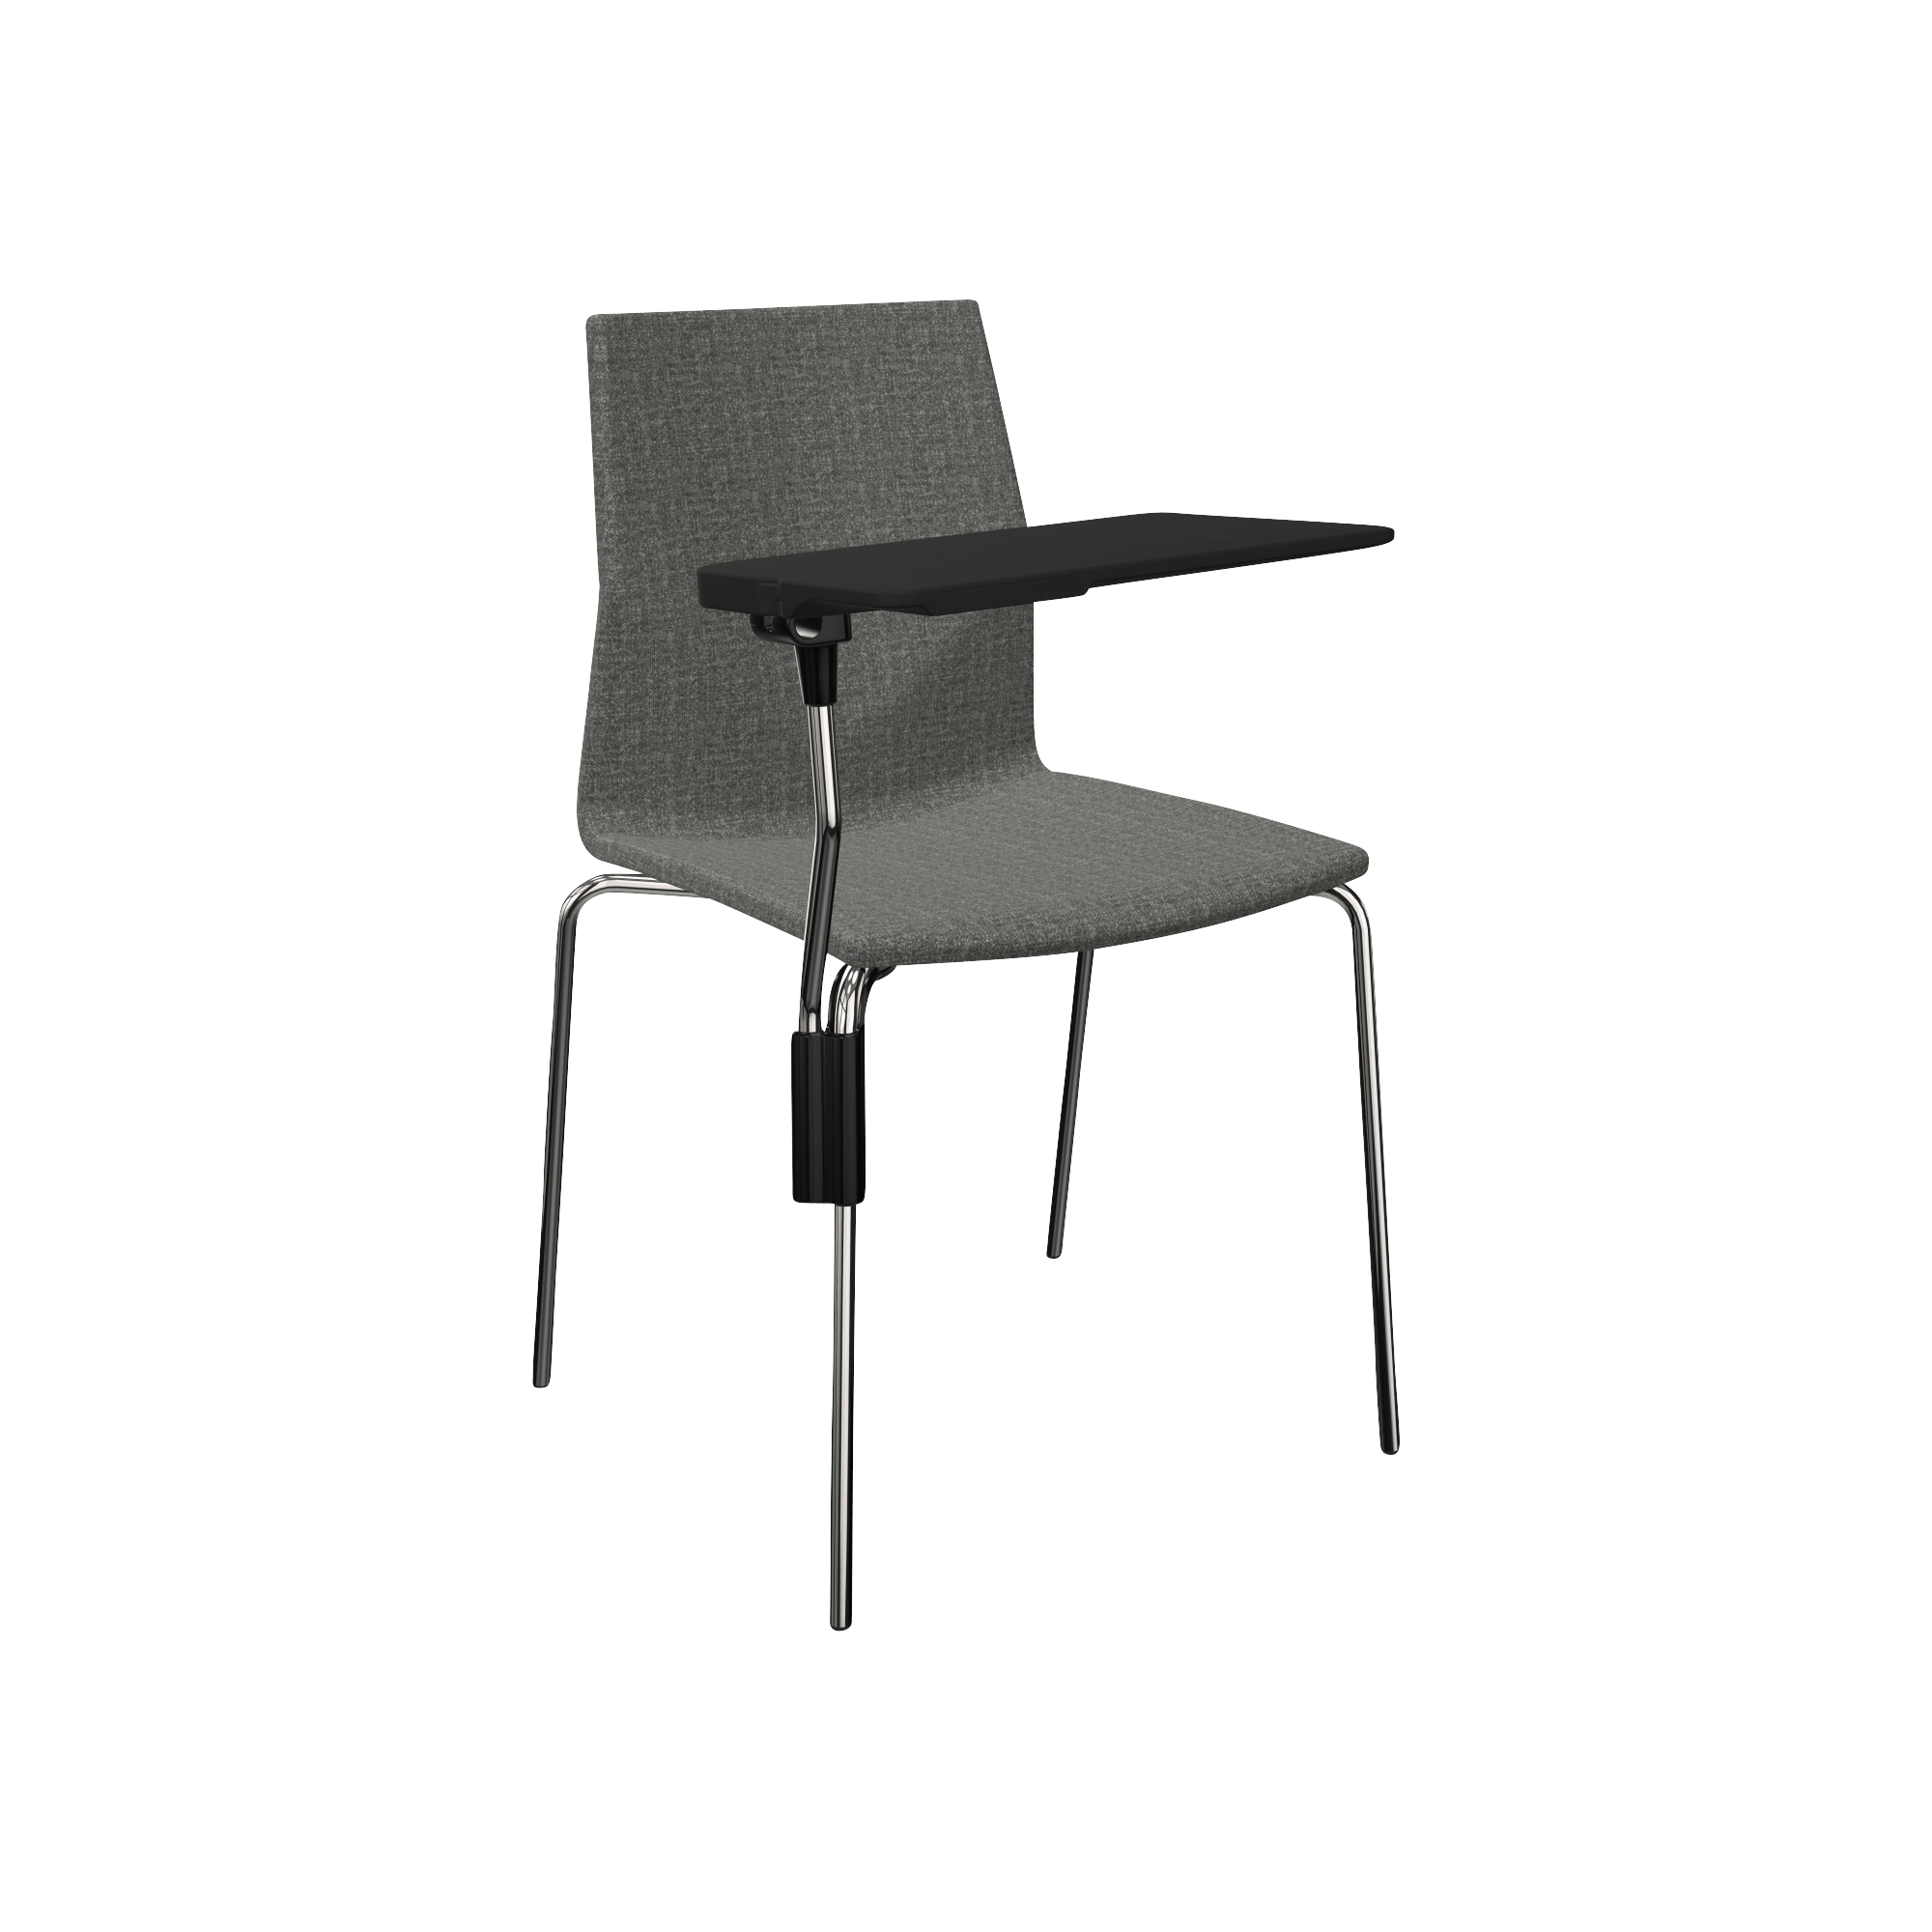 grey chair with metal legs and black laptop tray